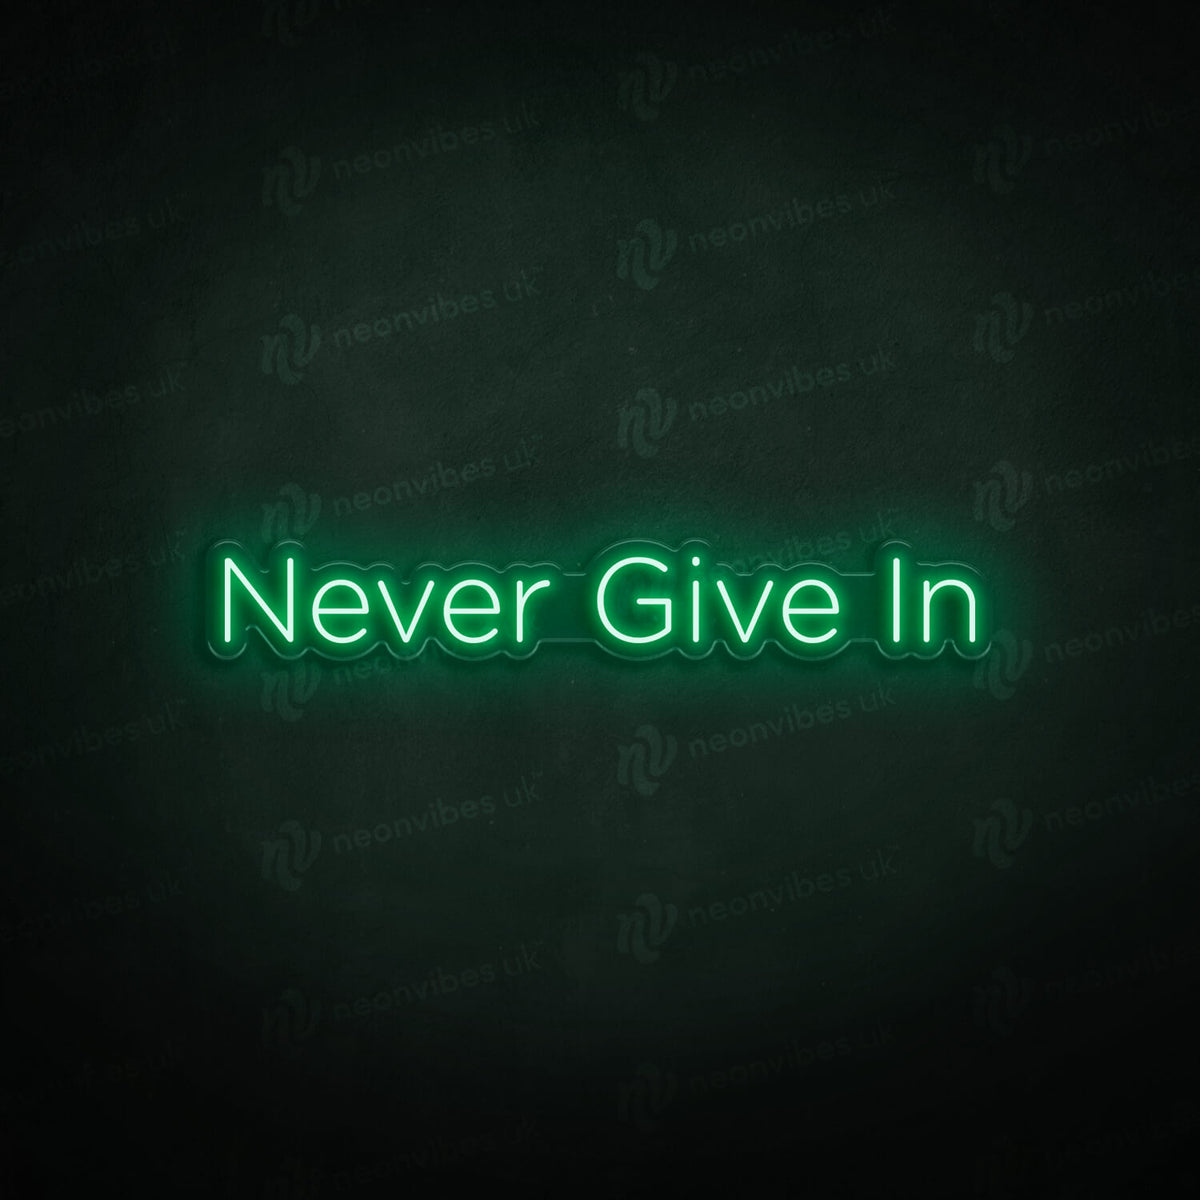 Never Give In neon sign